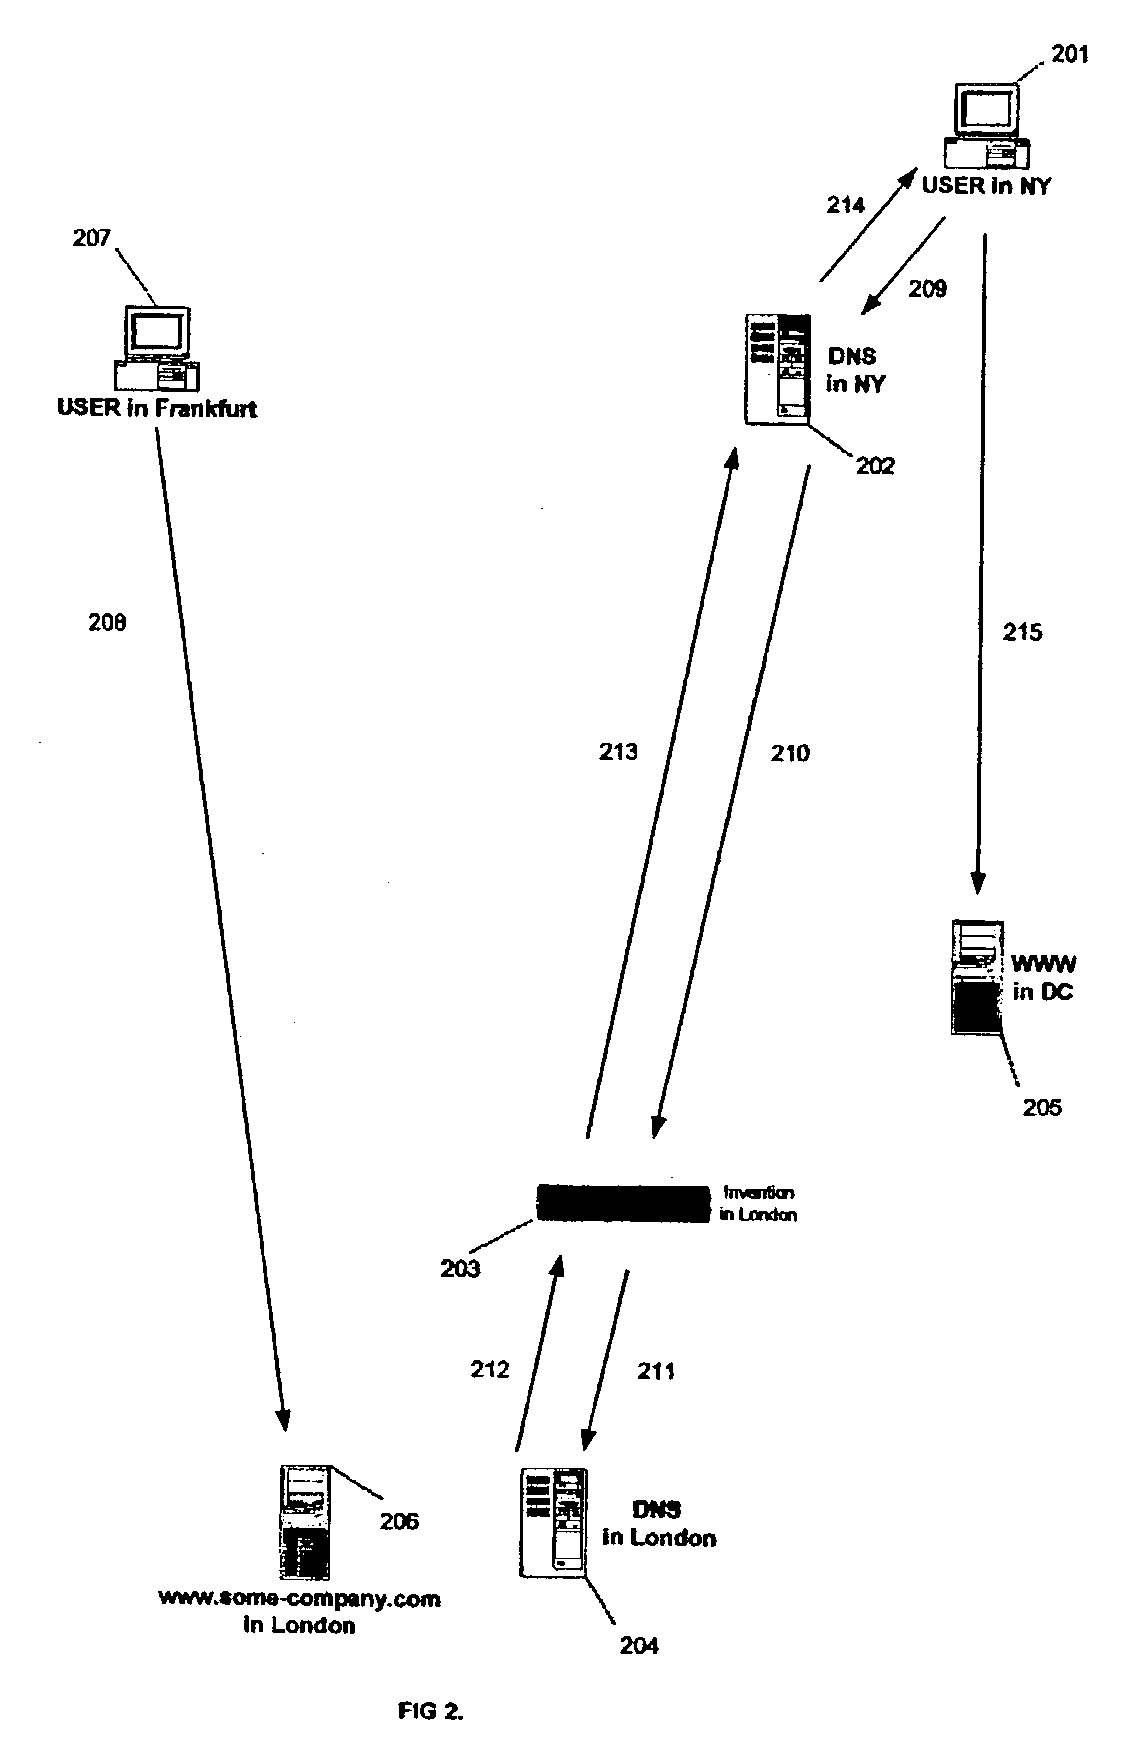 Apparatus and method for transparent selection of an Internet server based on geographic location of a user